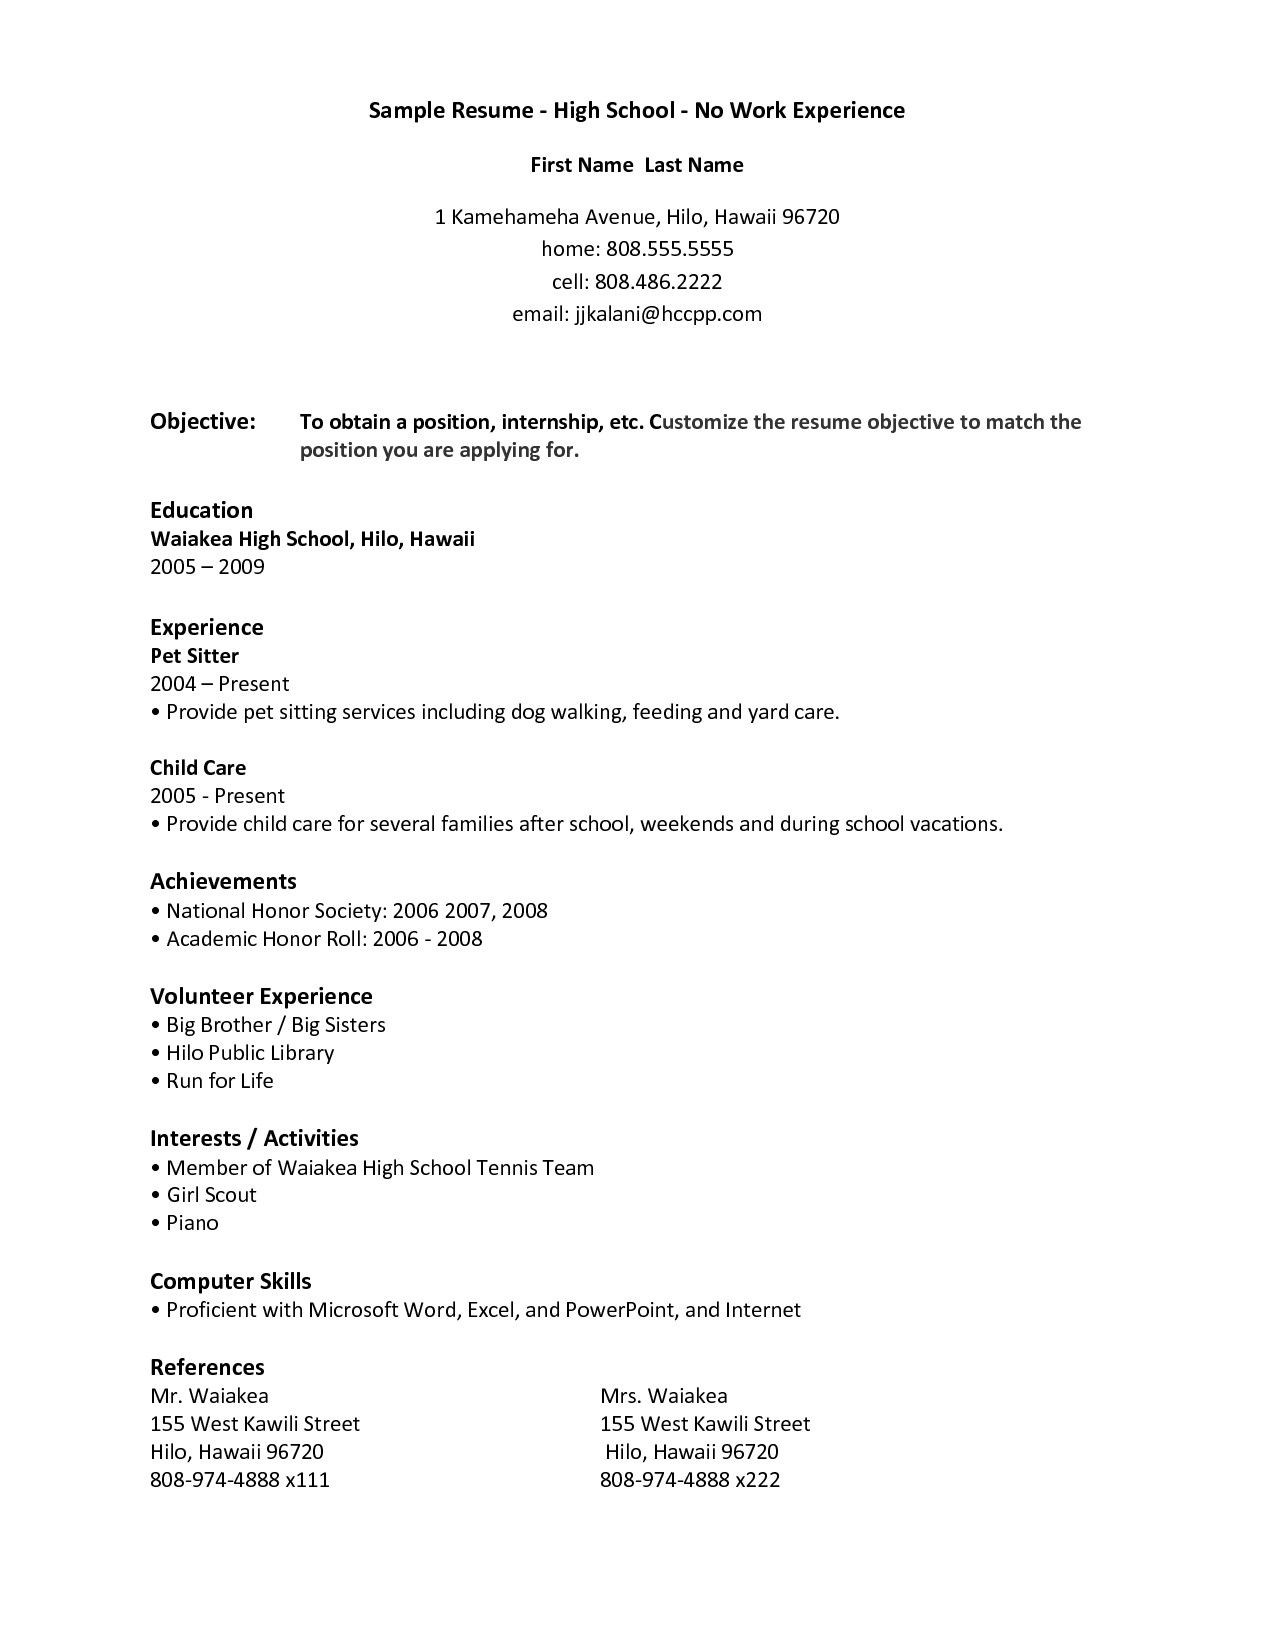 Sample Resume for High School Student No Experience Free Resume Templates No Work Experience #experience …